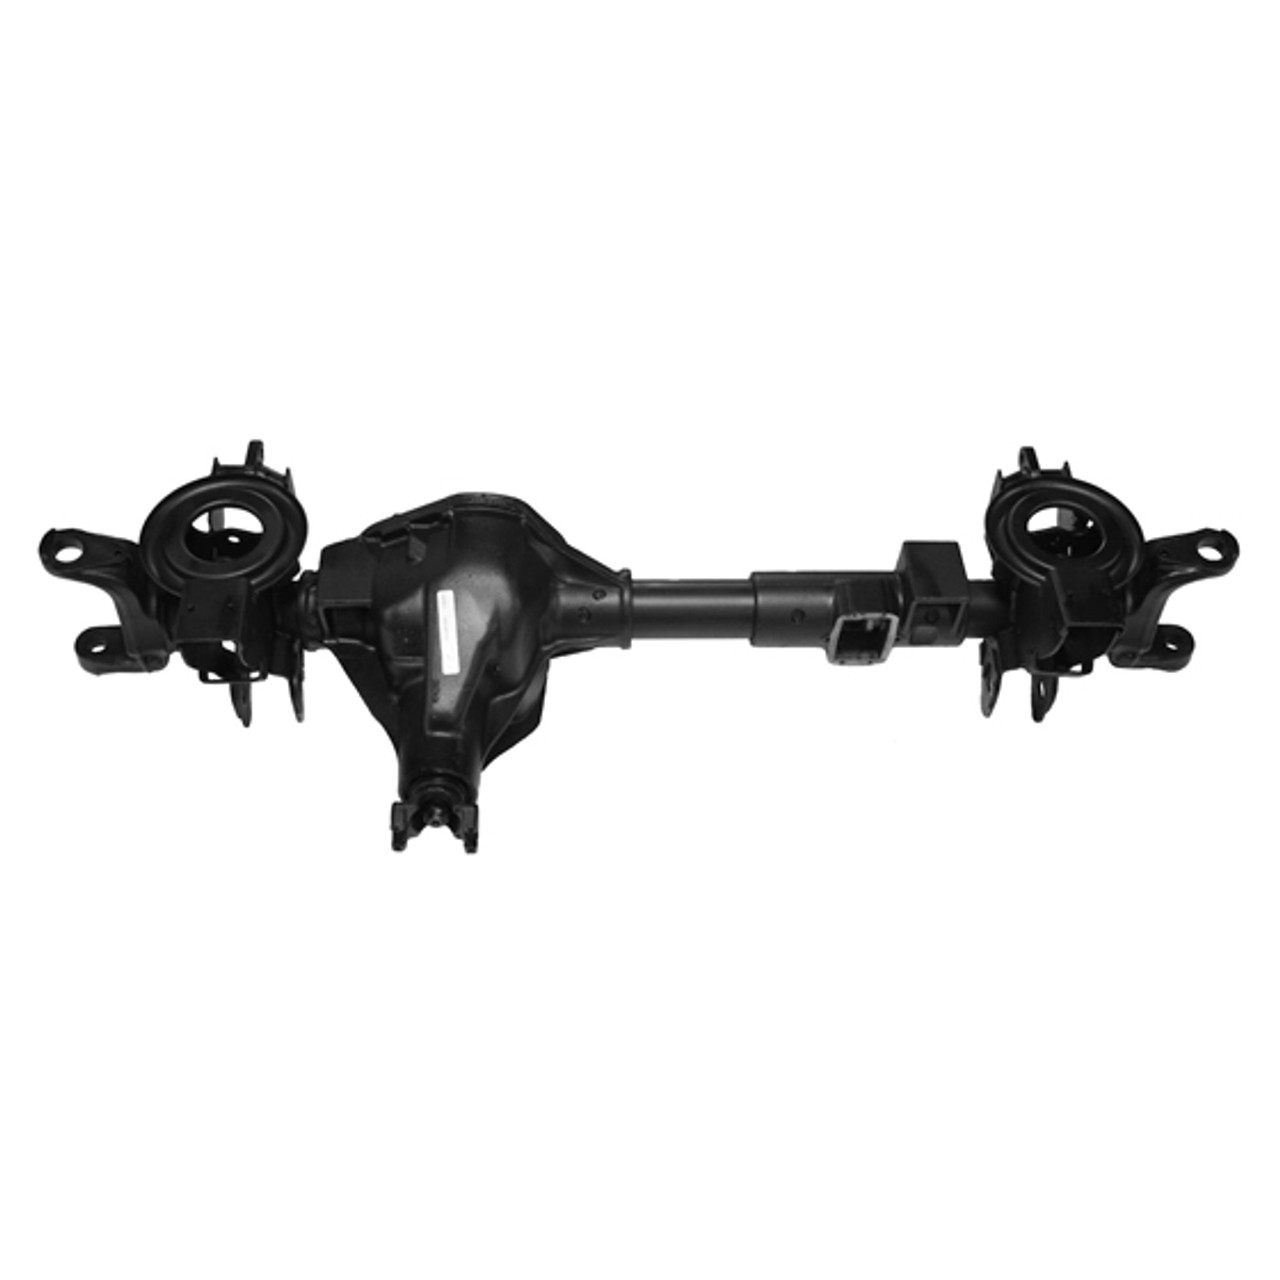 Reman Complete Axle Assembly for Dana 60 1998 Dodge Ram 2500 & 3500 3.54 Ratio with 4 Wheel ABS